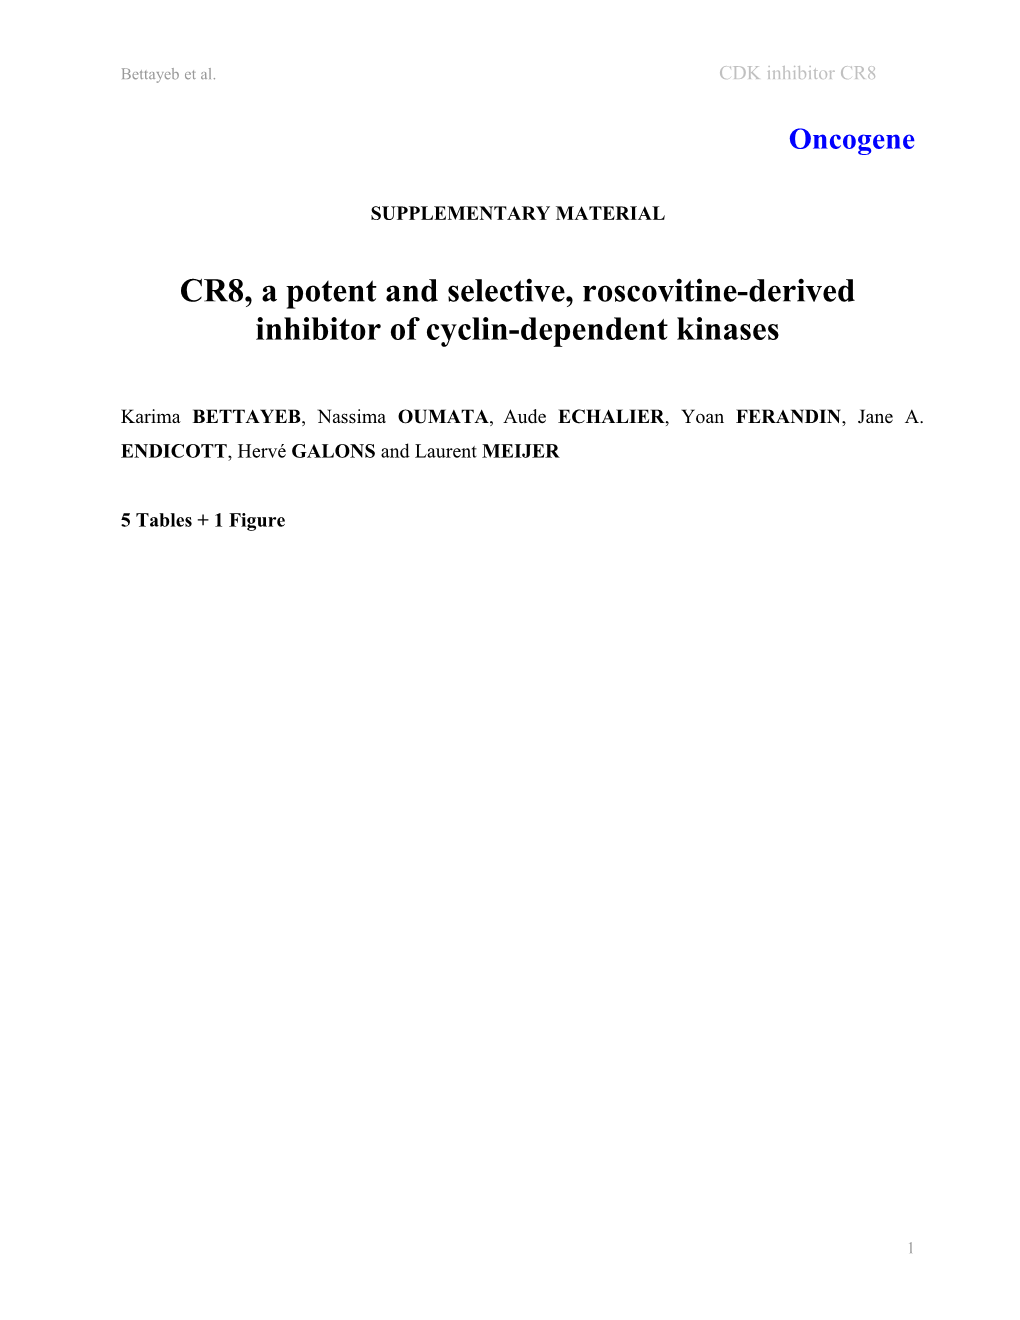 CR8, a Potent and Selective, Roscovitine-Derived Inhibitor of Cyclin-Dependent Kinases